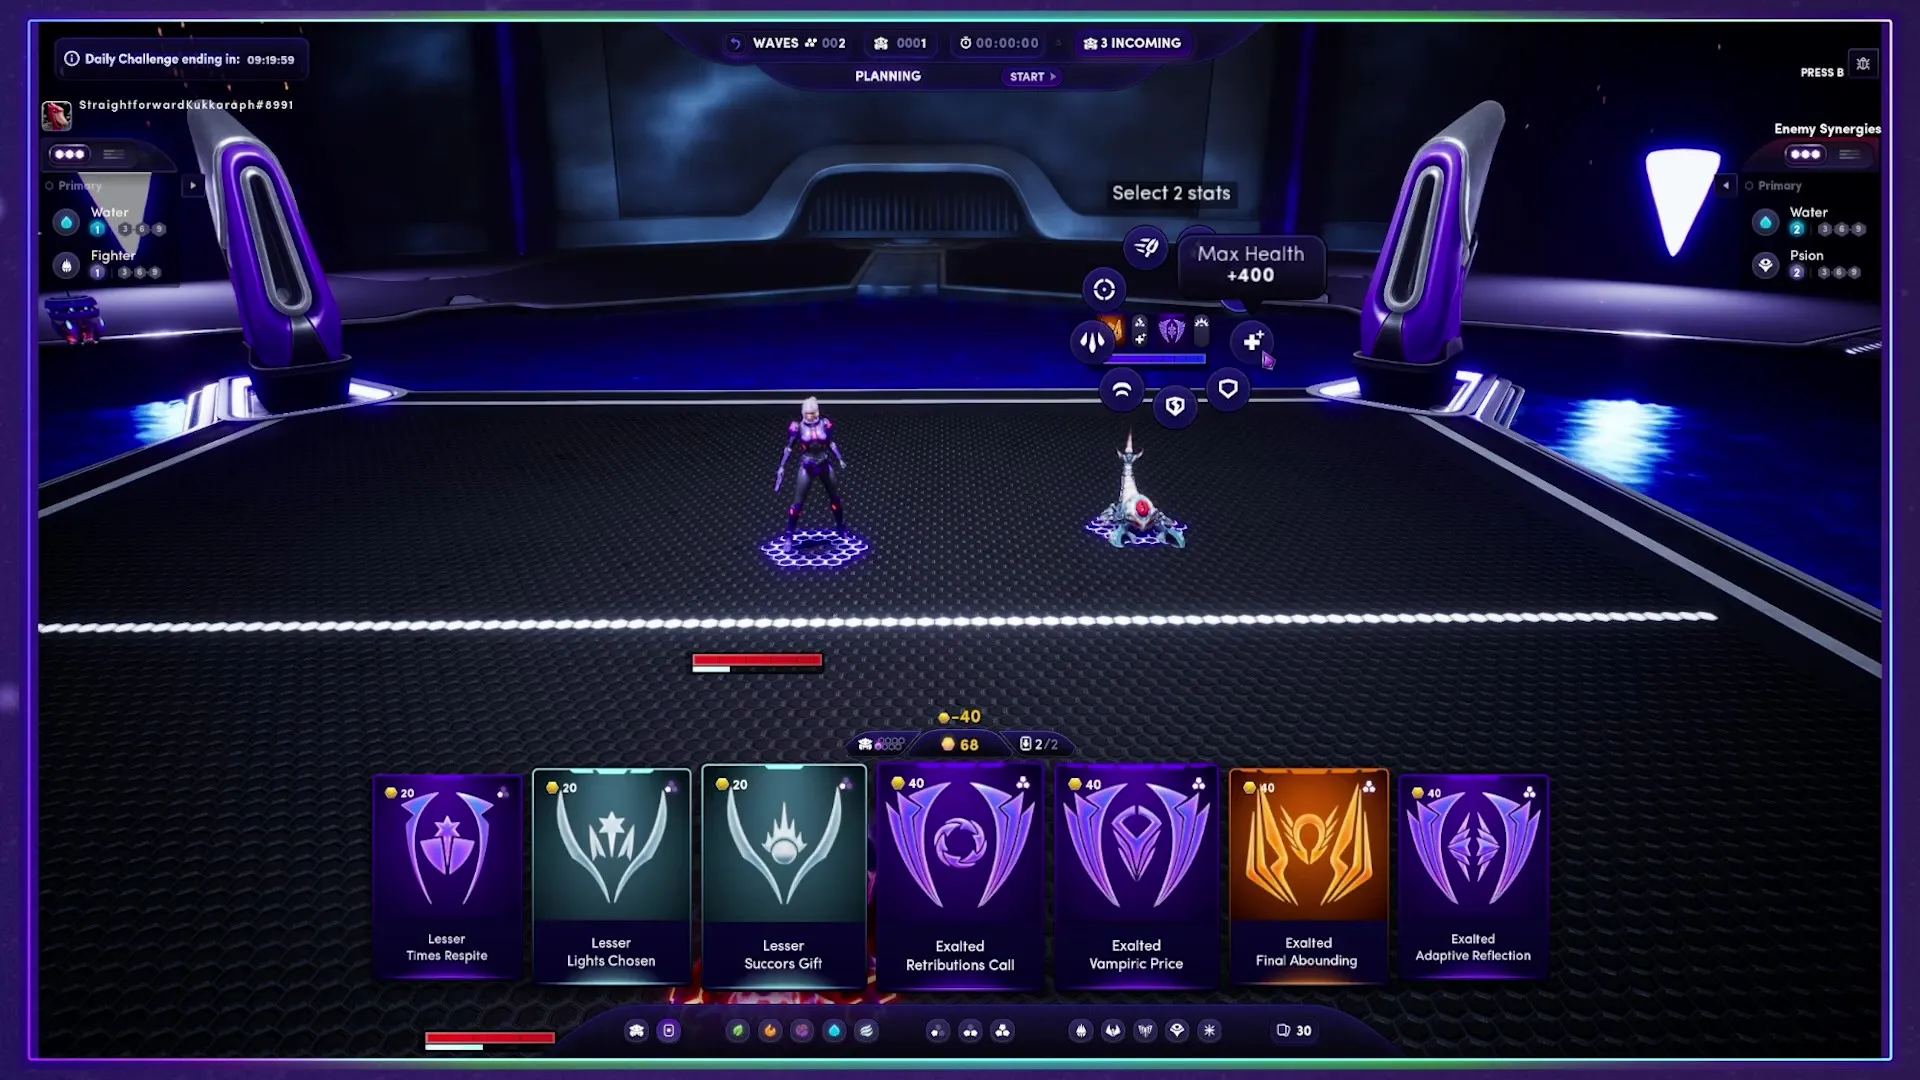 You can put an augment to your Illuvials during the planning phase in Illuvium Arena. This augment can change the attribute and stats of your Illuvials that can change the course of the game.